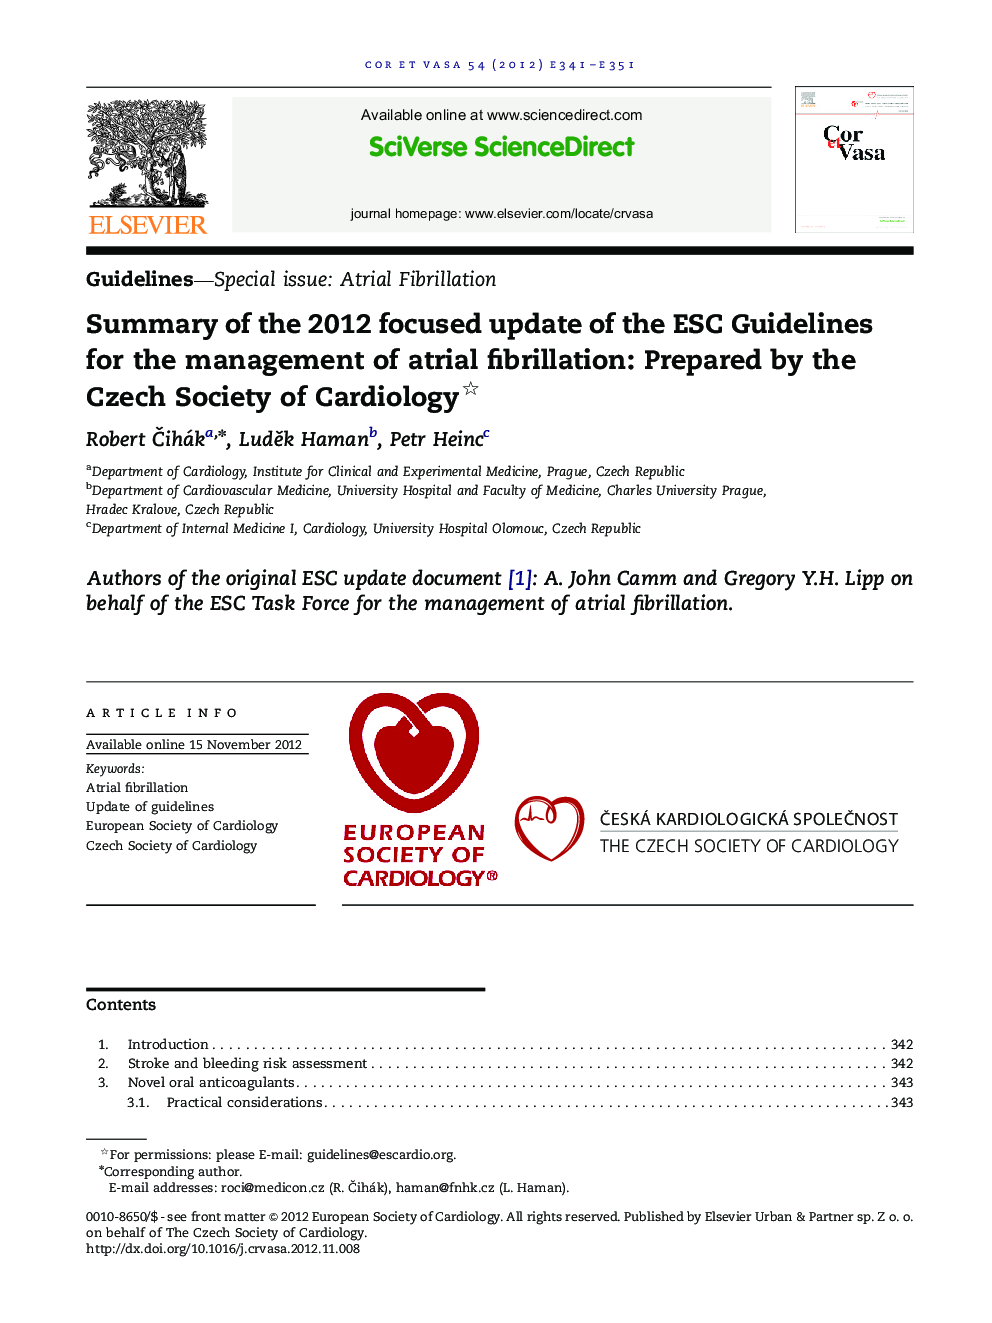 Summary of the 2012 focused update of the ESC Guidelines for the management of atrial fibrillation: Prepared by the Czech Society of Cardiology